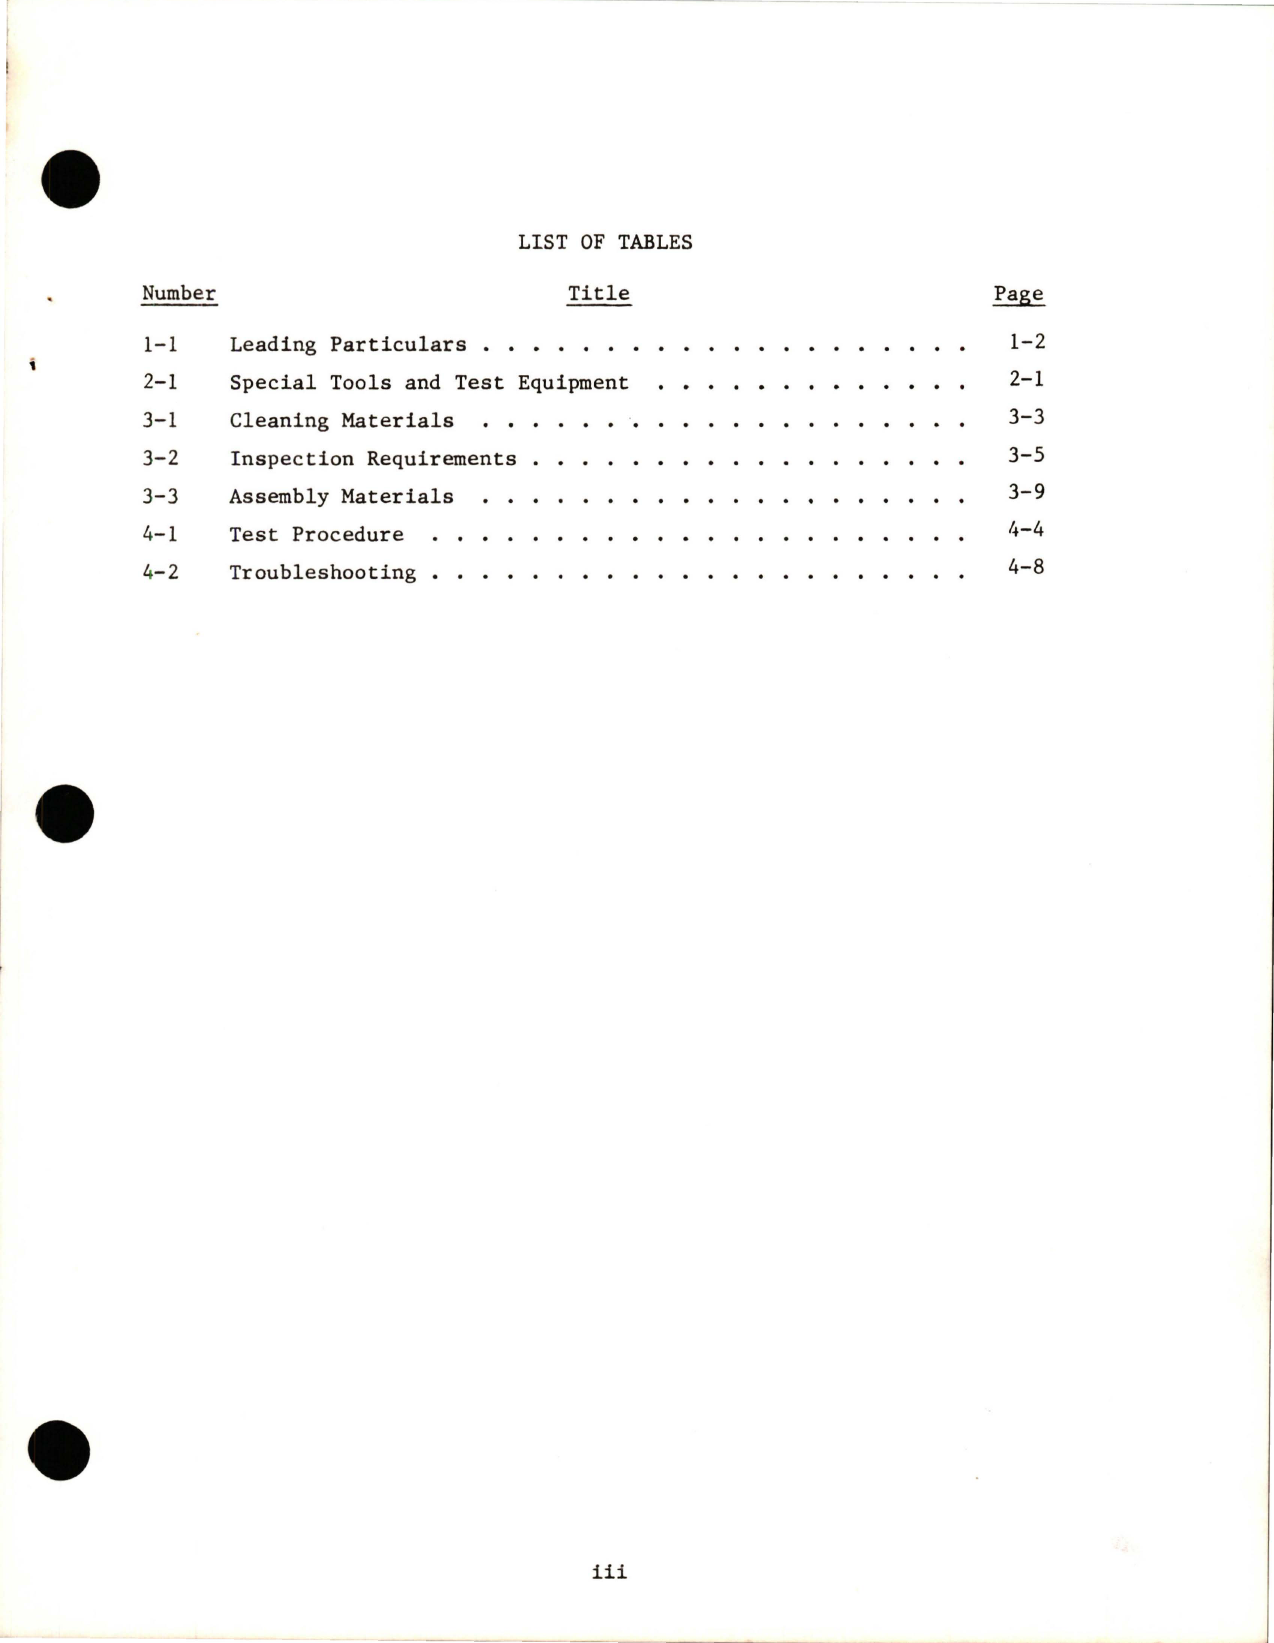 Sample page 5 from AirCorps Library document: Overhaul Manual with Illustrated Parts Breakdown for Hydraulic Servo Cylinder - Part 41103650-007